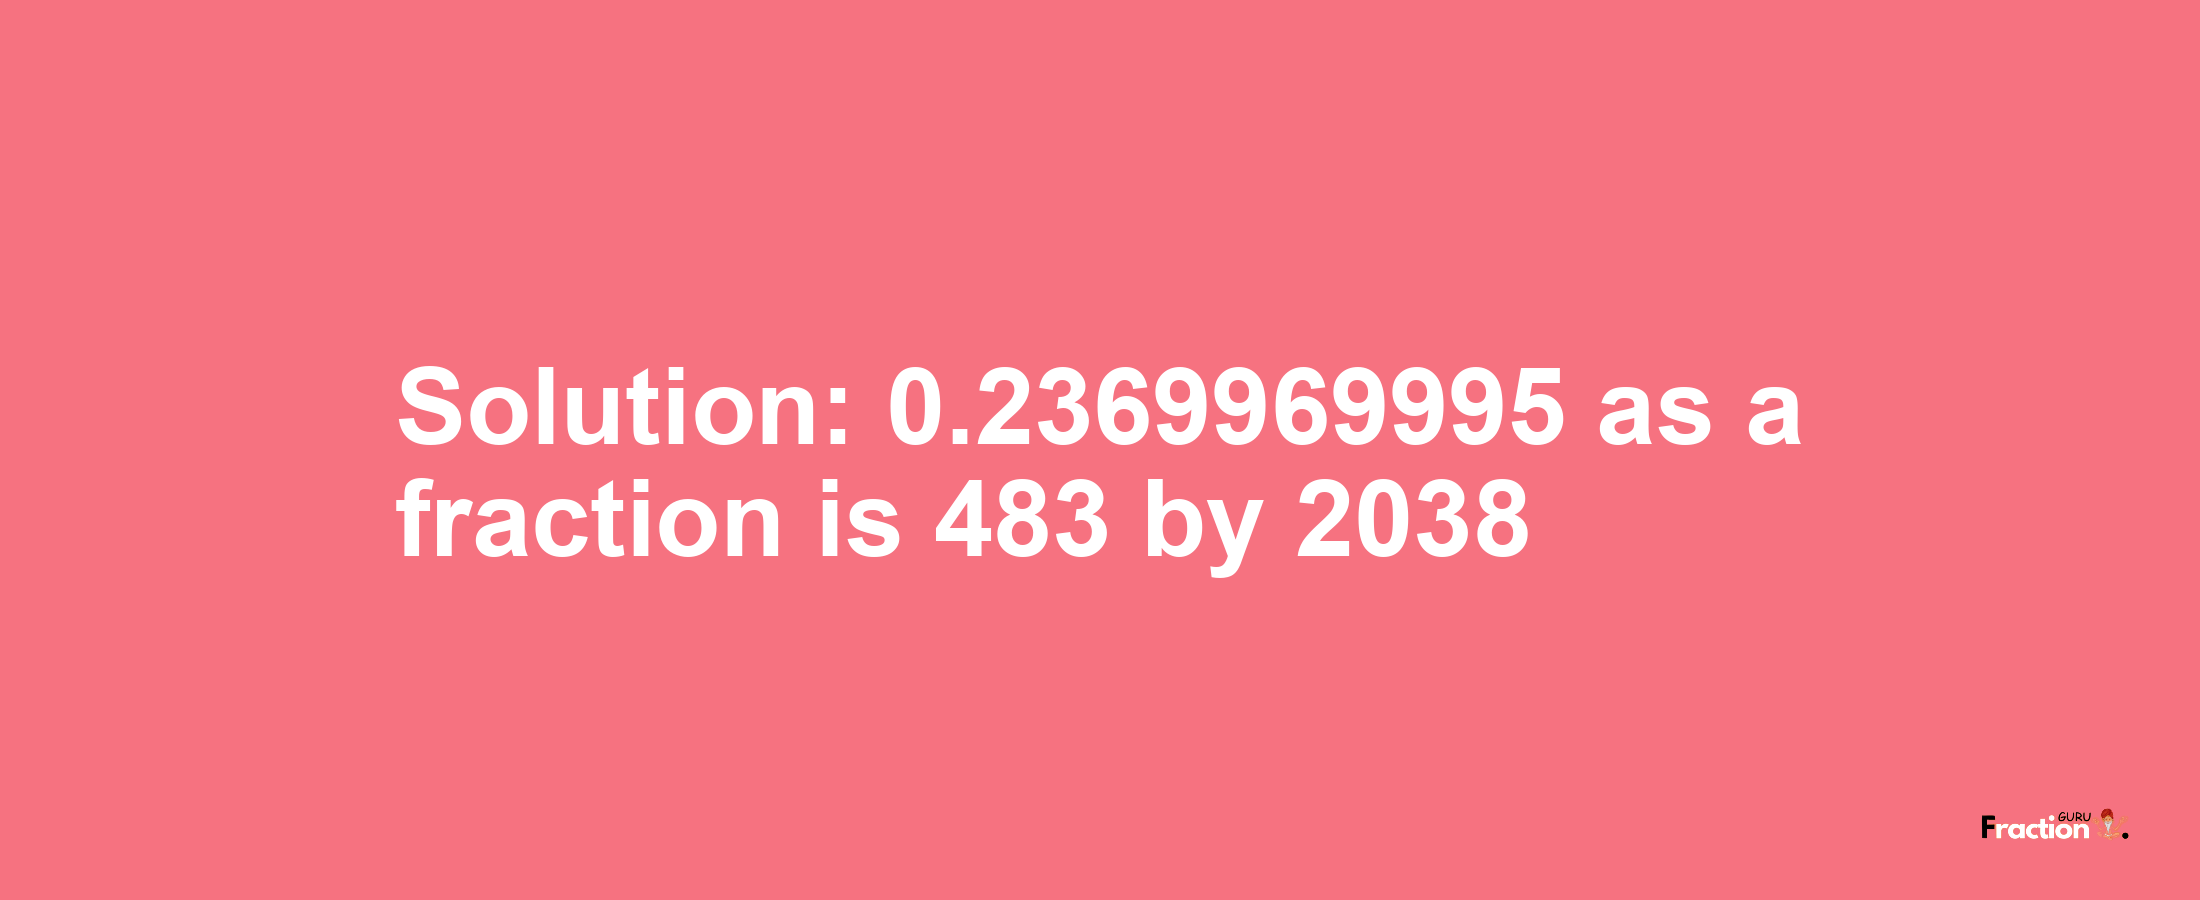 Solution:0.2369969995 as a fraction is 483/2038